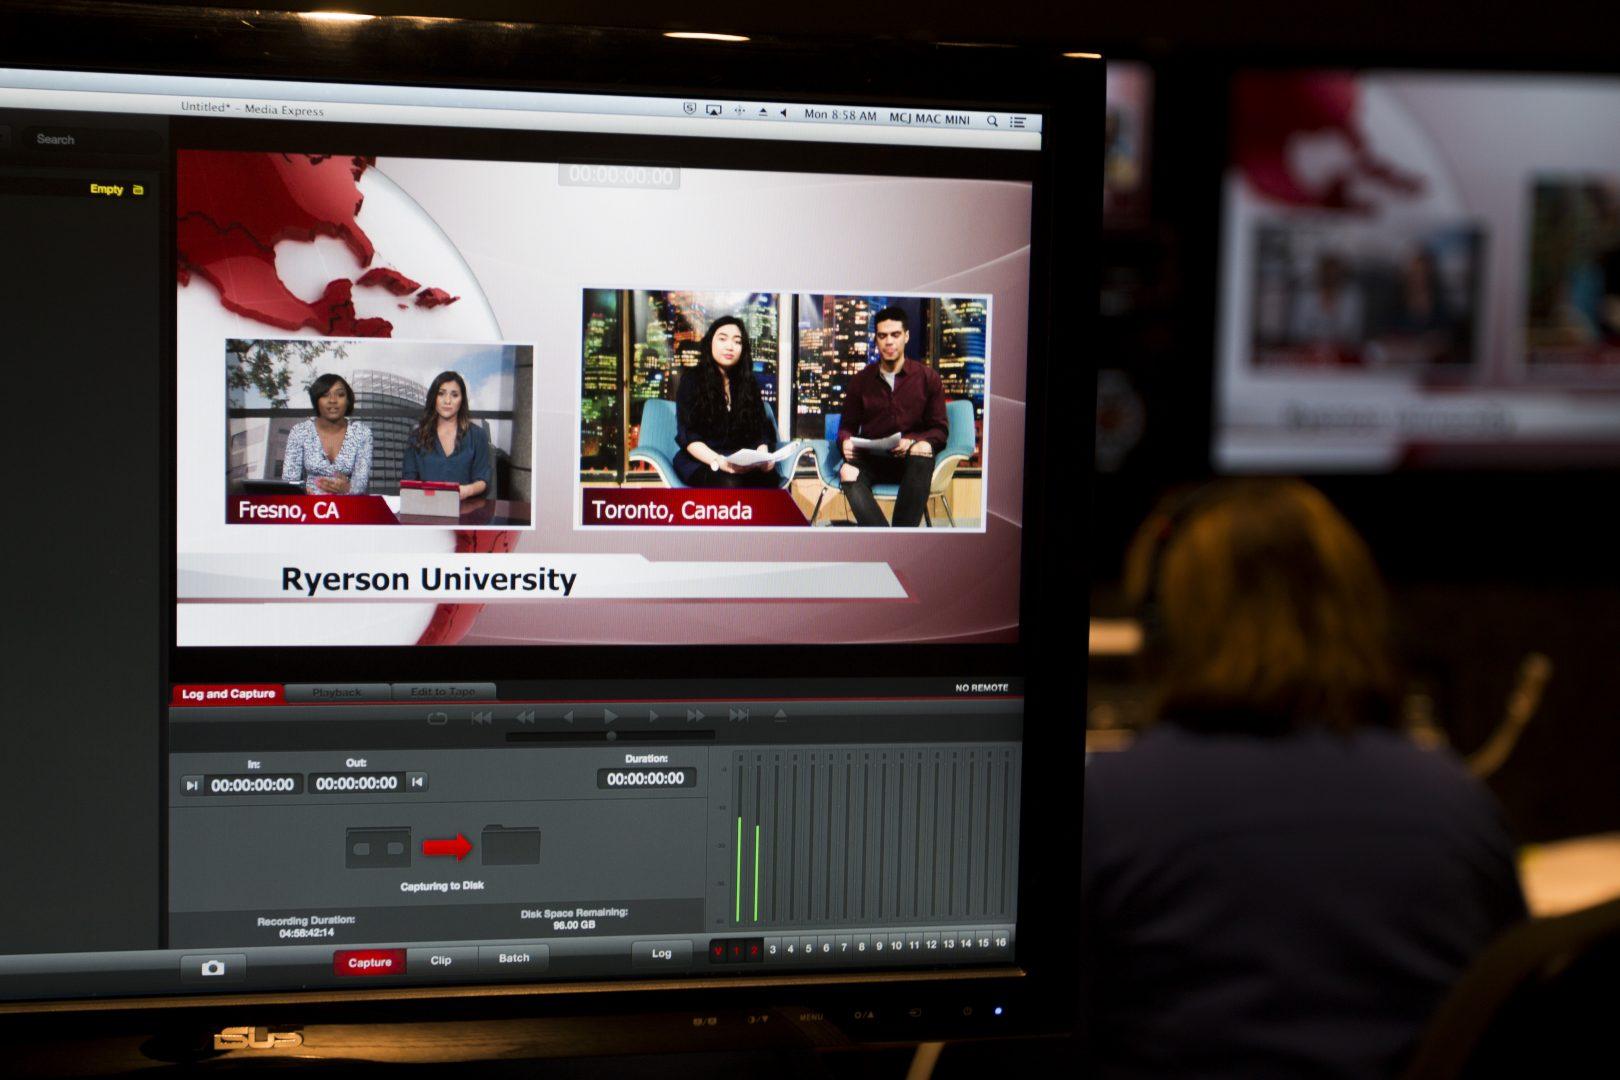 Deja Wright and Vanessa Romo talk to fellow student broadcasters from Ryerson University in Toronto, Canada during the Global News Relay on April 23, 2018.